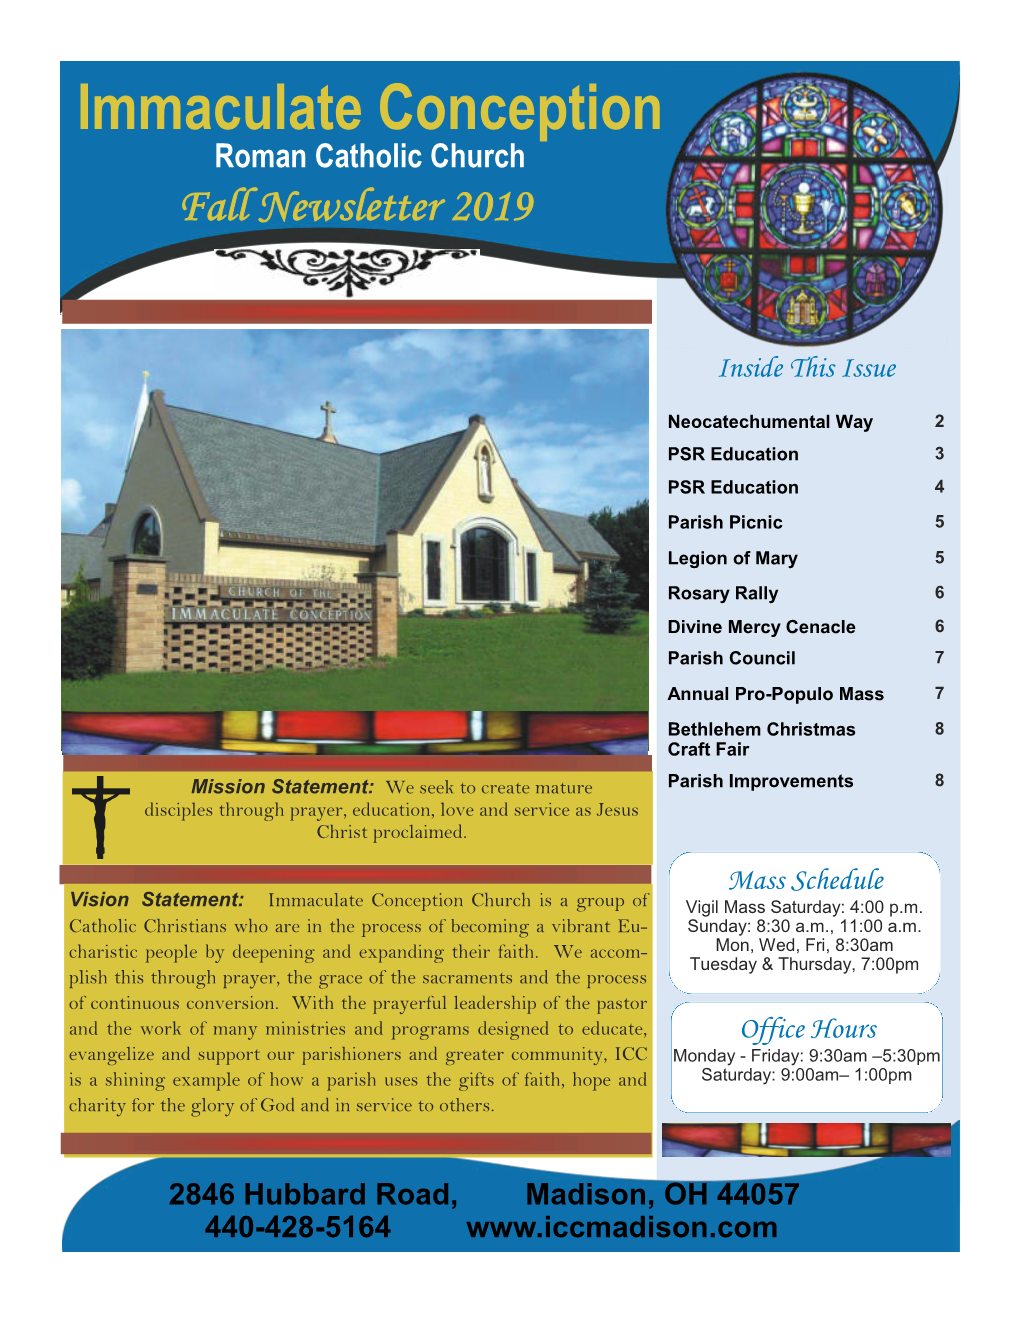 Immaculate Conception Roman Catholic Church Fall Newsletter 2019